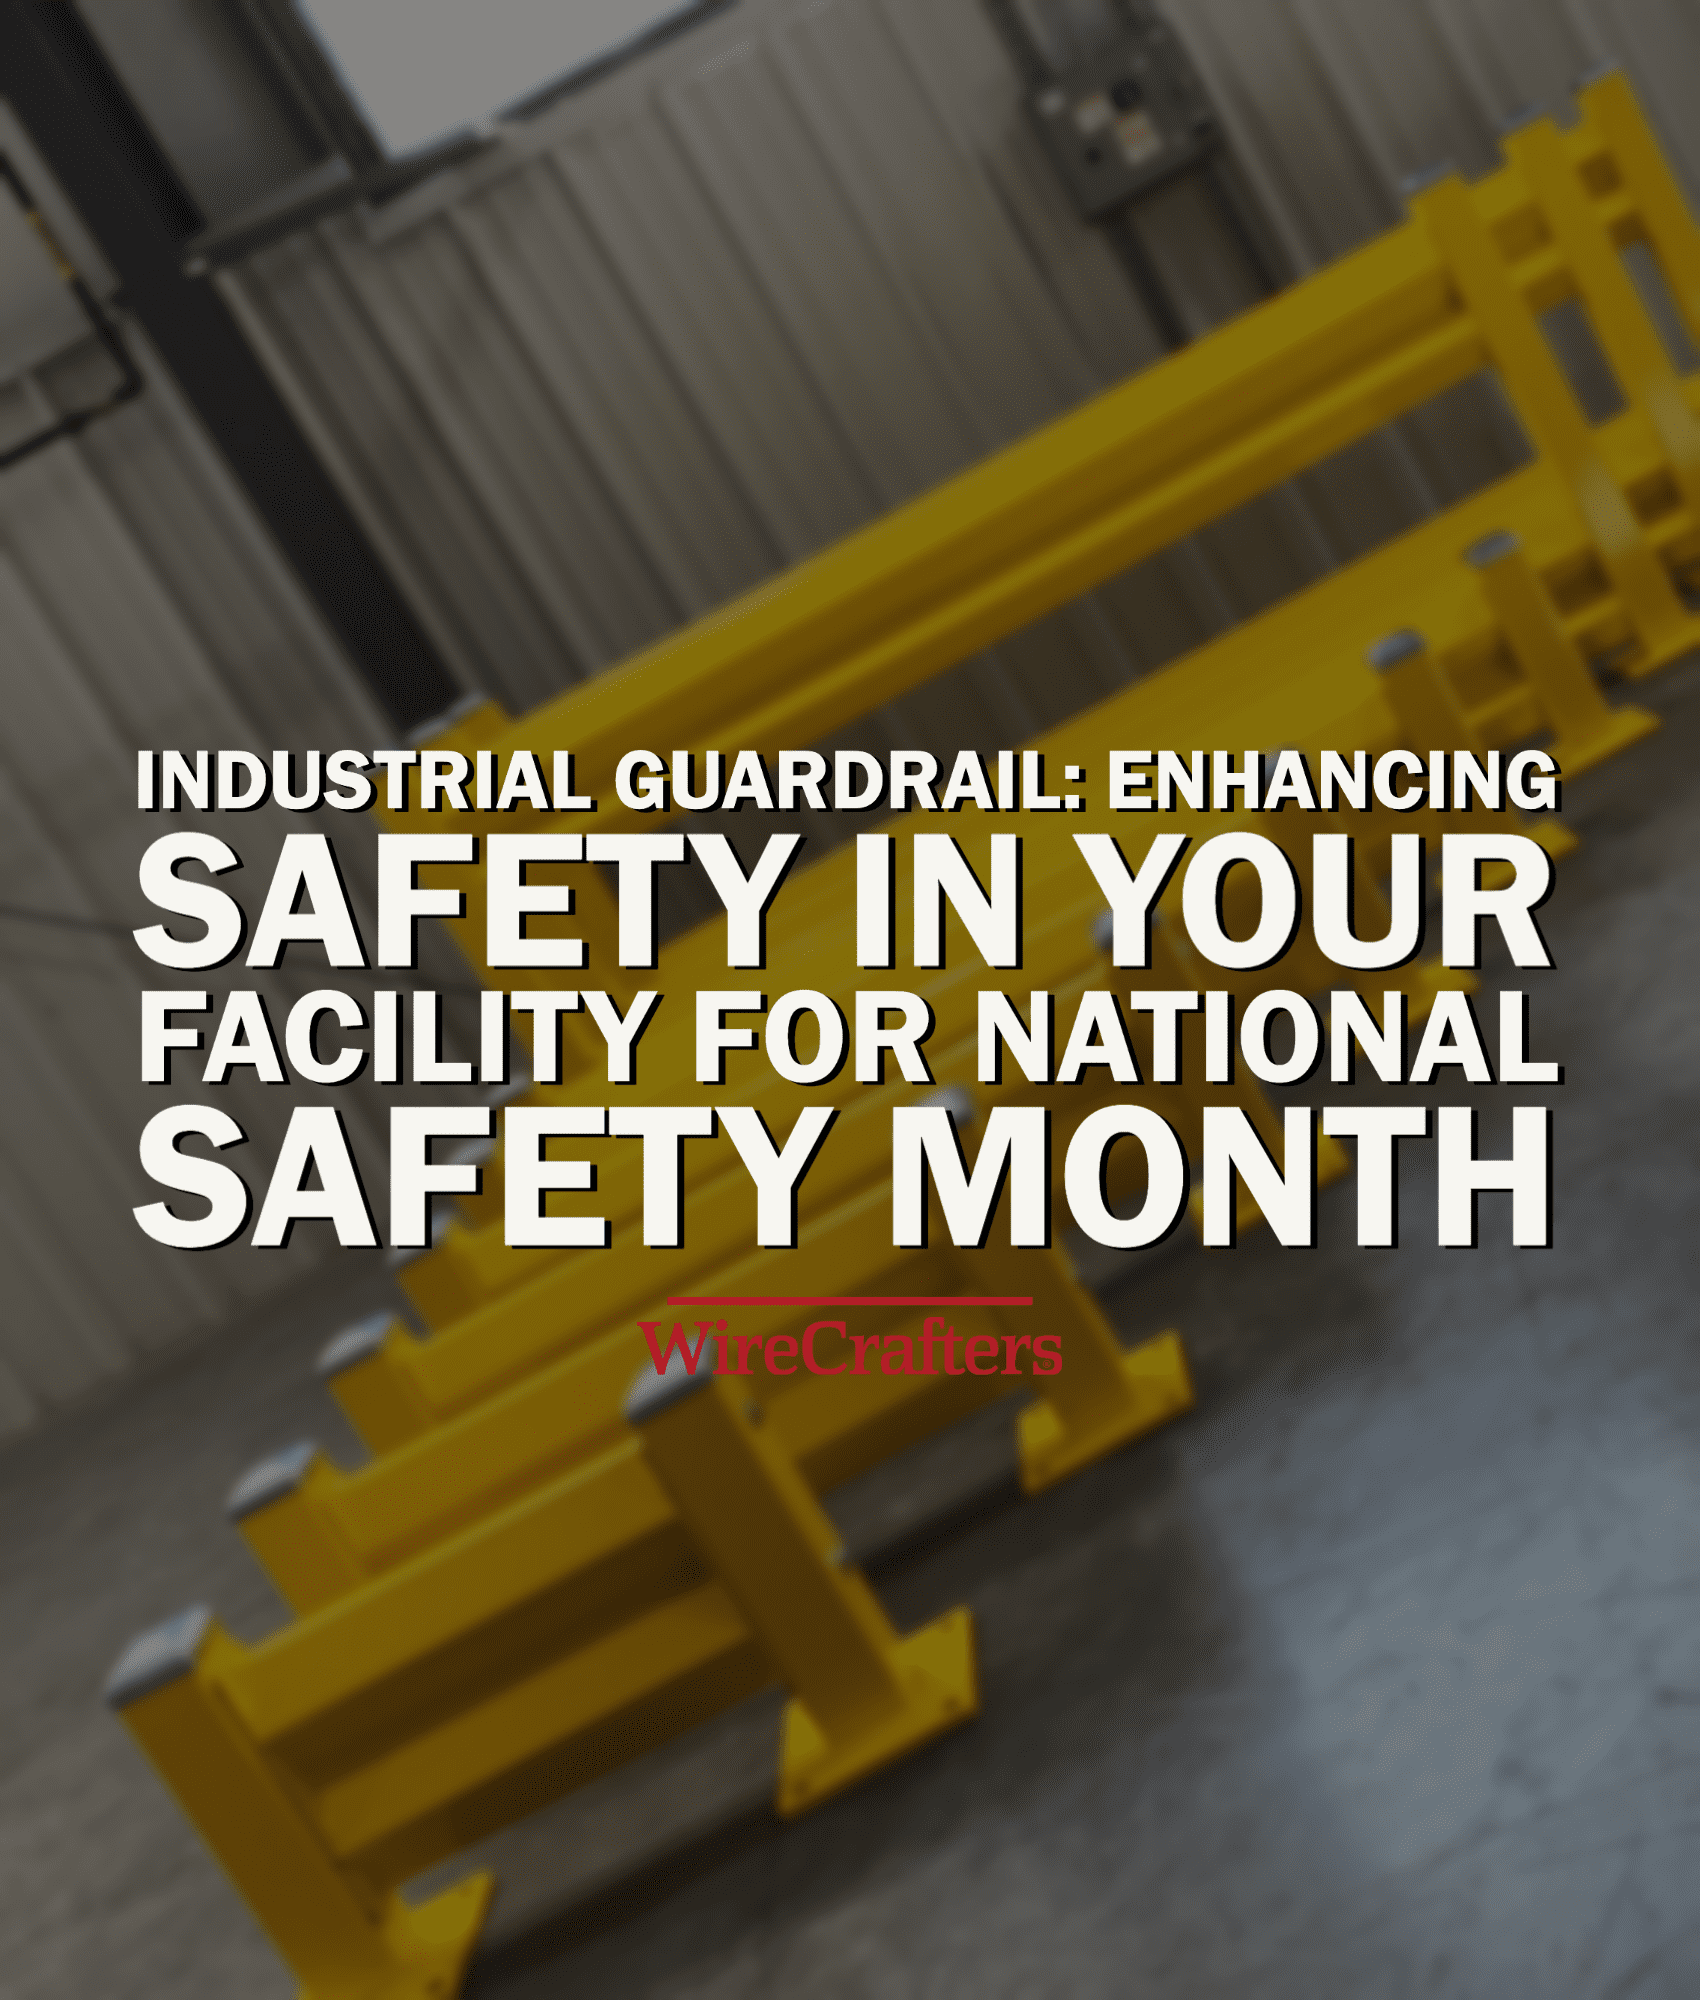 Industrial GuardRail: Enhancing Safety in Your Facility for National Safety Month